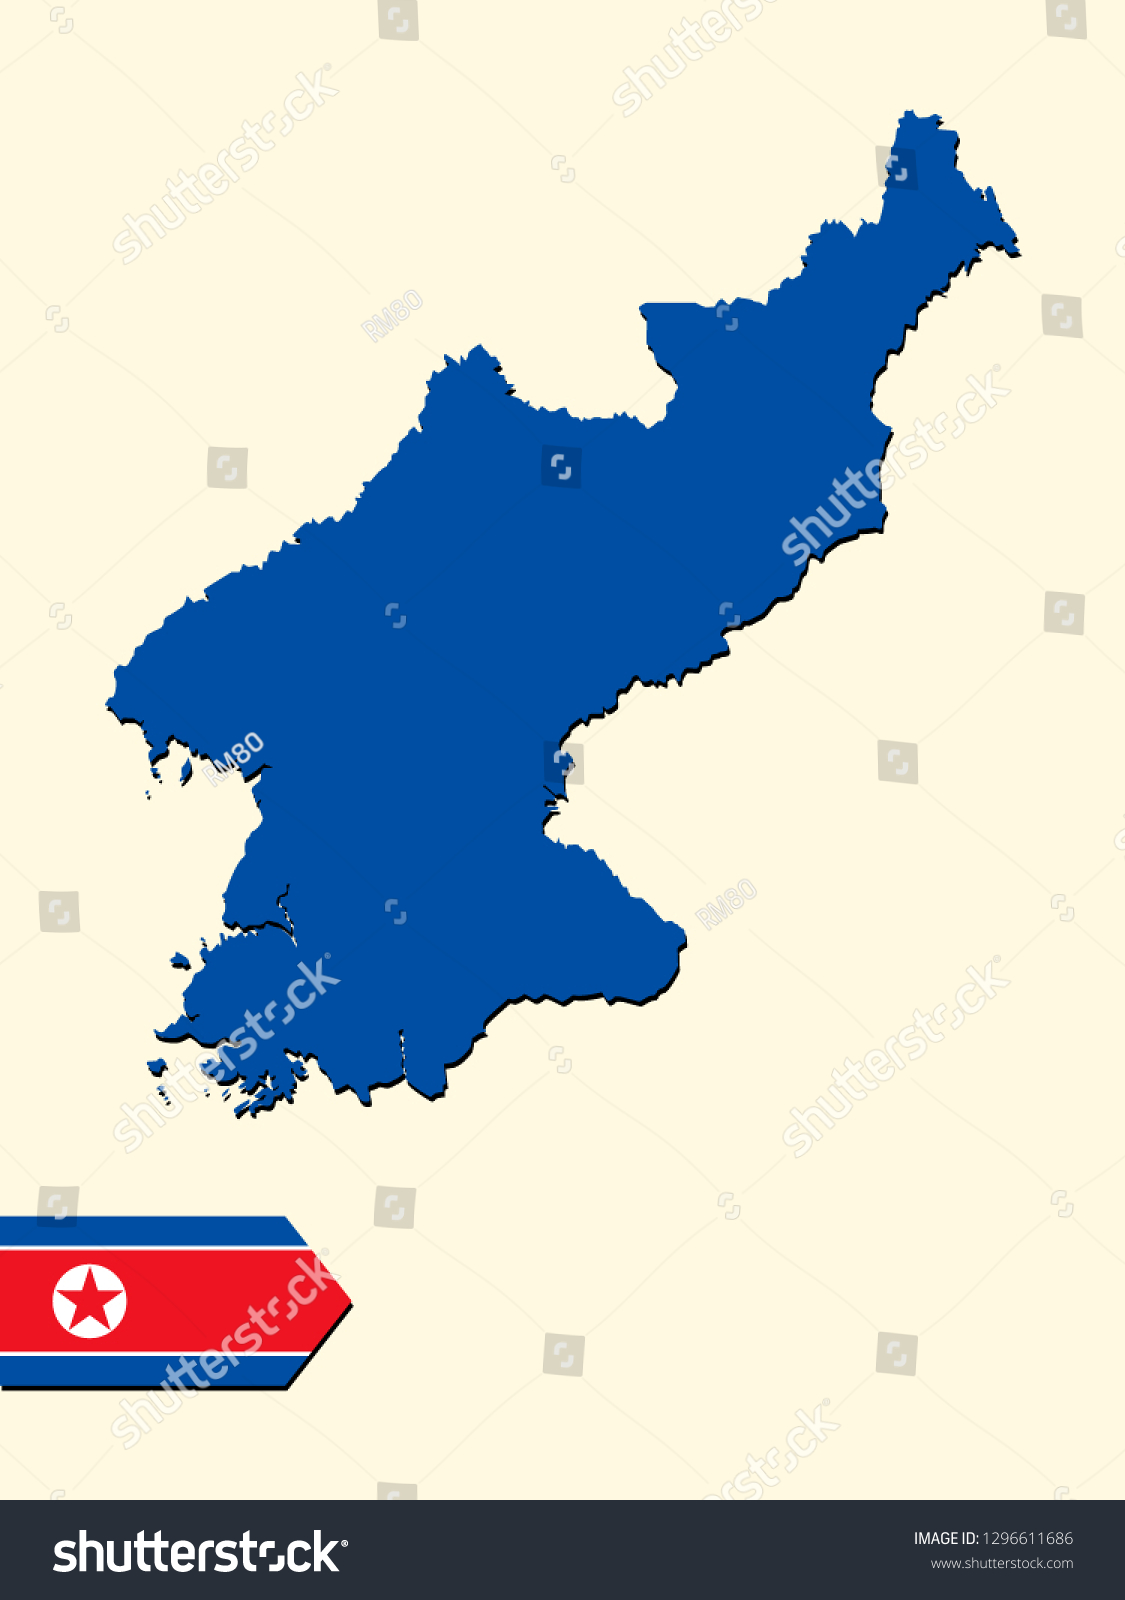 North Korea map with national flag - Royalty Free Stock Vector ...